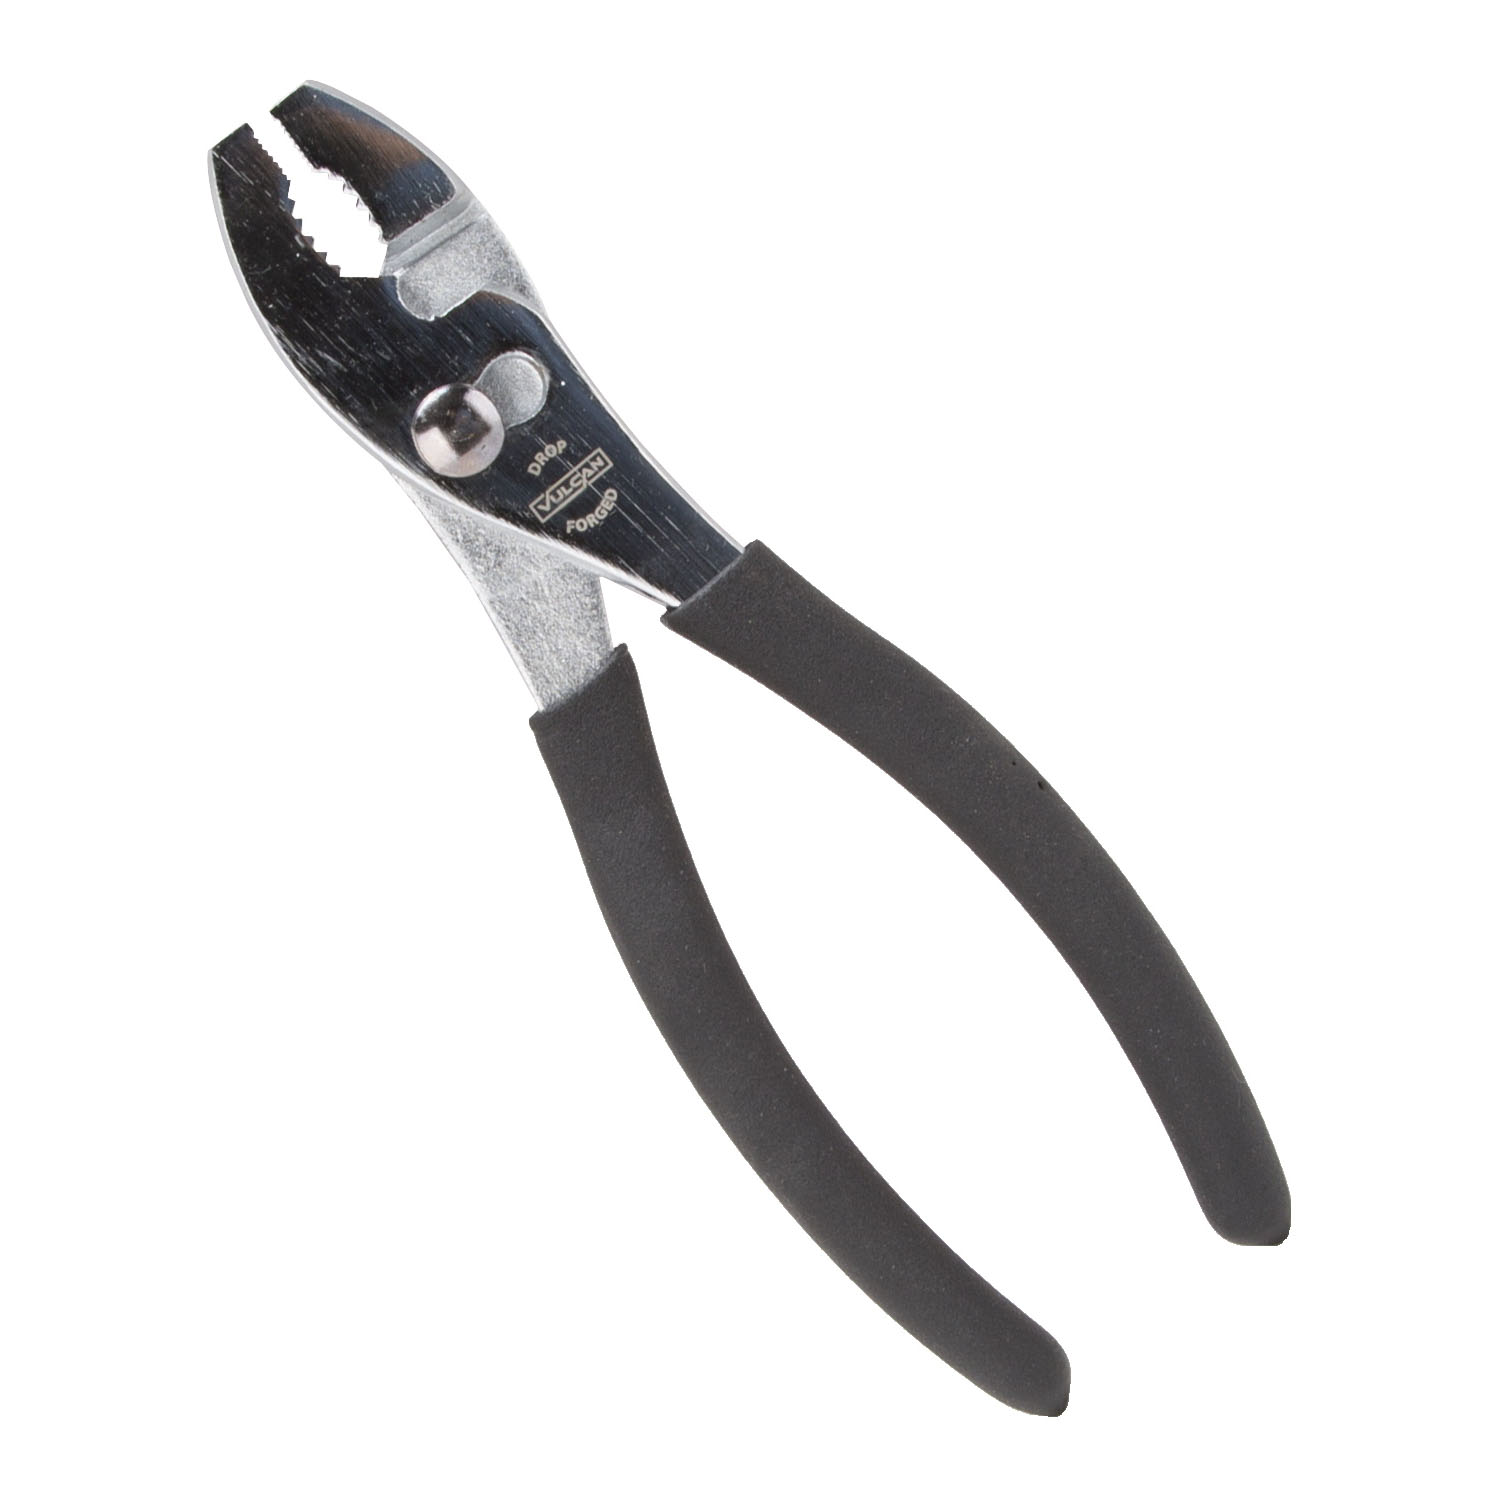 JL-NP004 Slip Joint Plier, 8 in OAL, 1-1/4 in Jaw Opening, Black Handle, Non-Slip Handle, 1-1/4 in W Jaw